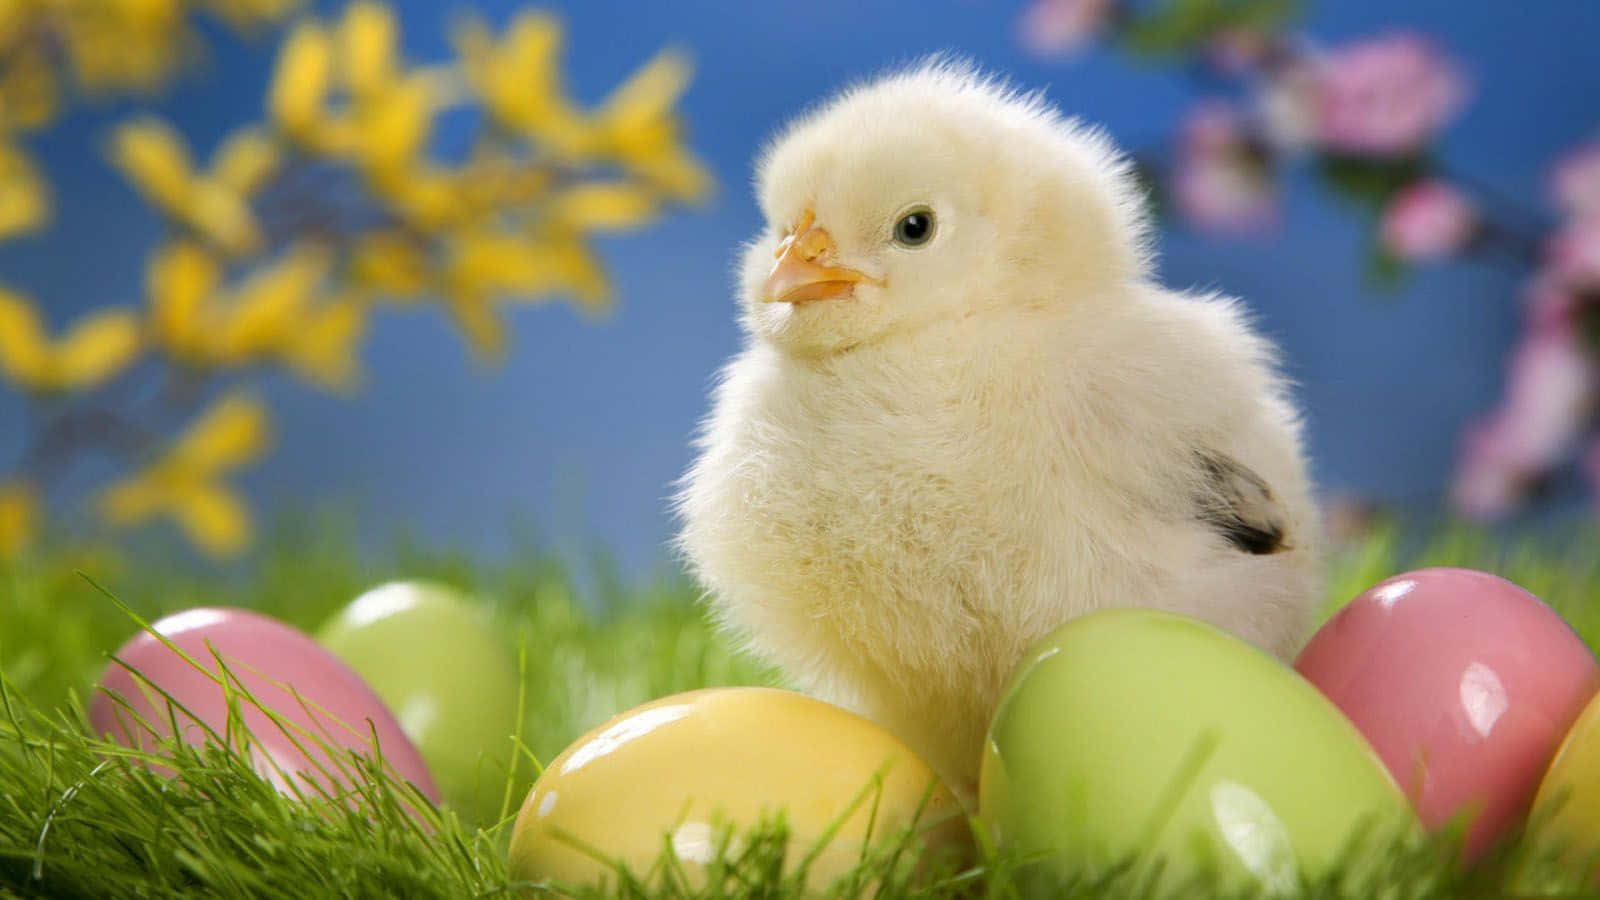 A Small Chick Is Sitting In The Grass With Colored Eggs